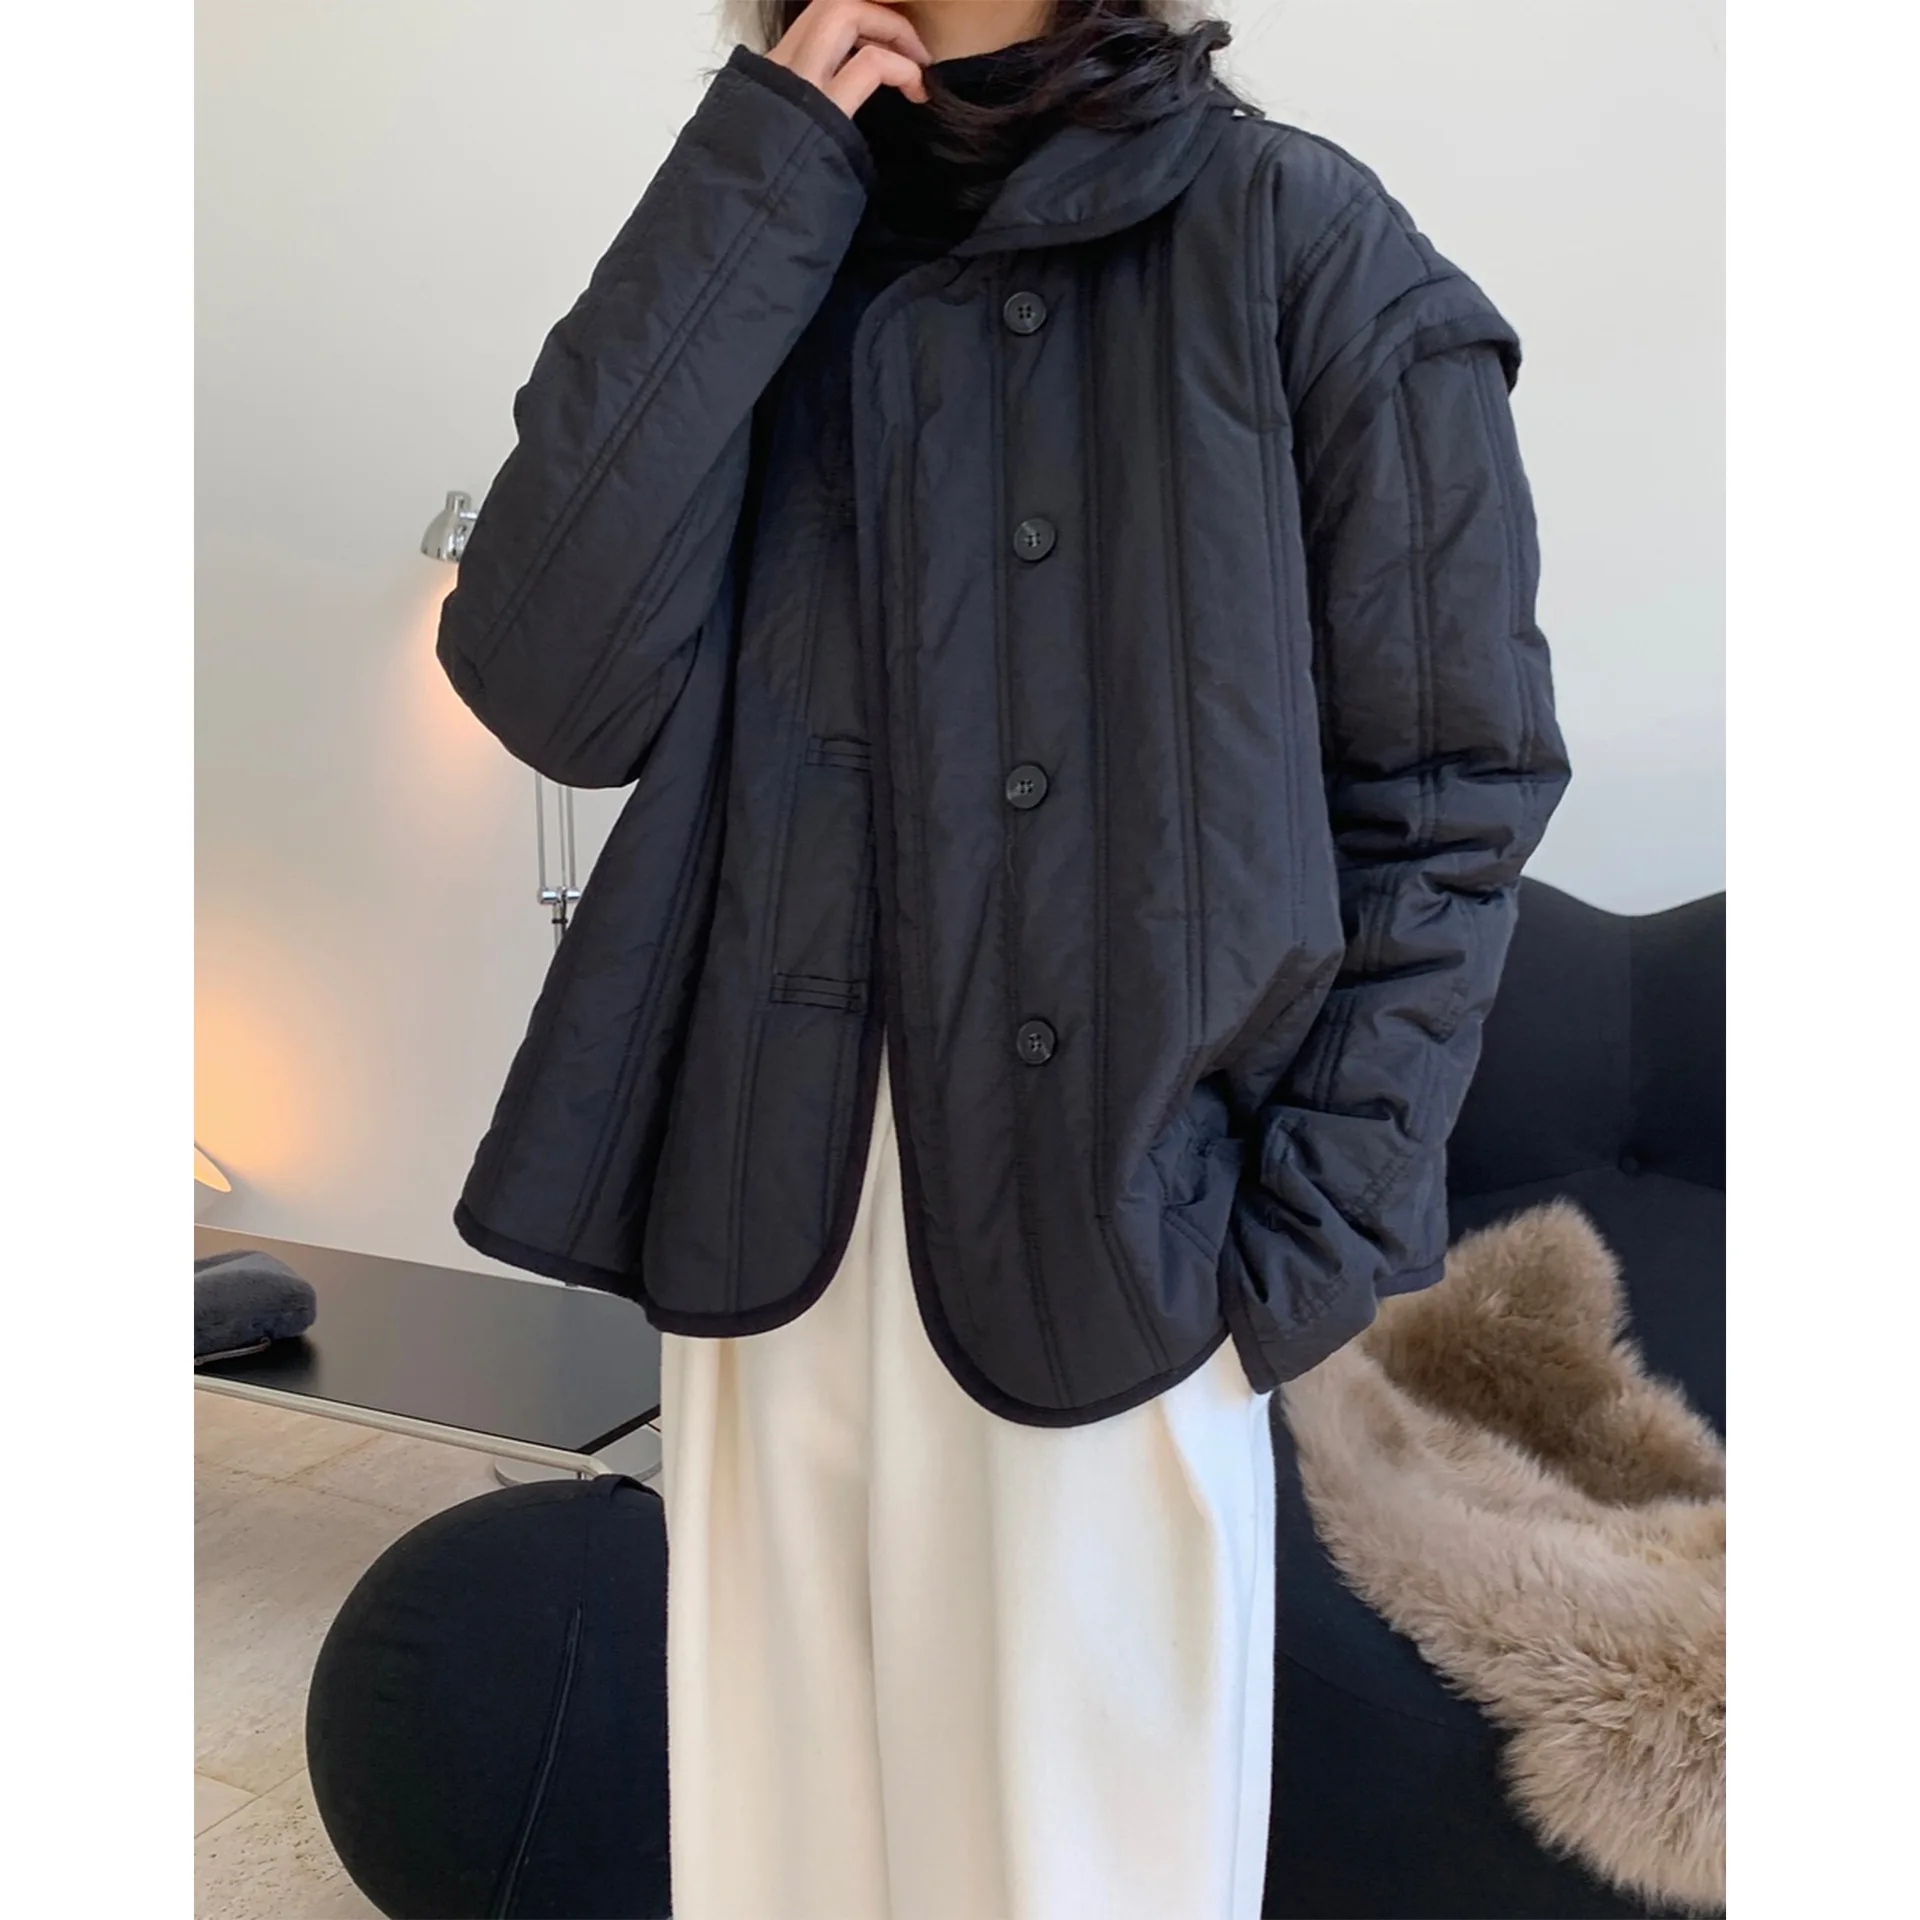 2022 Winter New Fashion Quality Design Lapel Cotton Jacket with Buckles Loose Warm and Comfortable Cotton Jacket Women's Thick